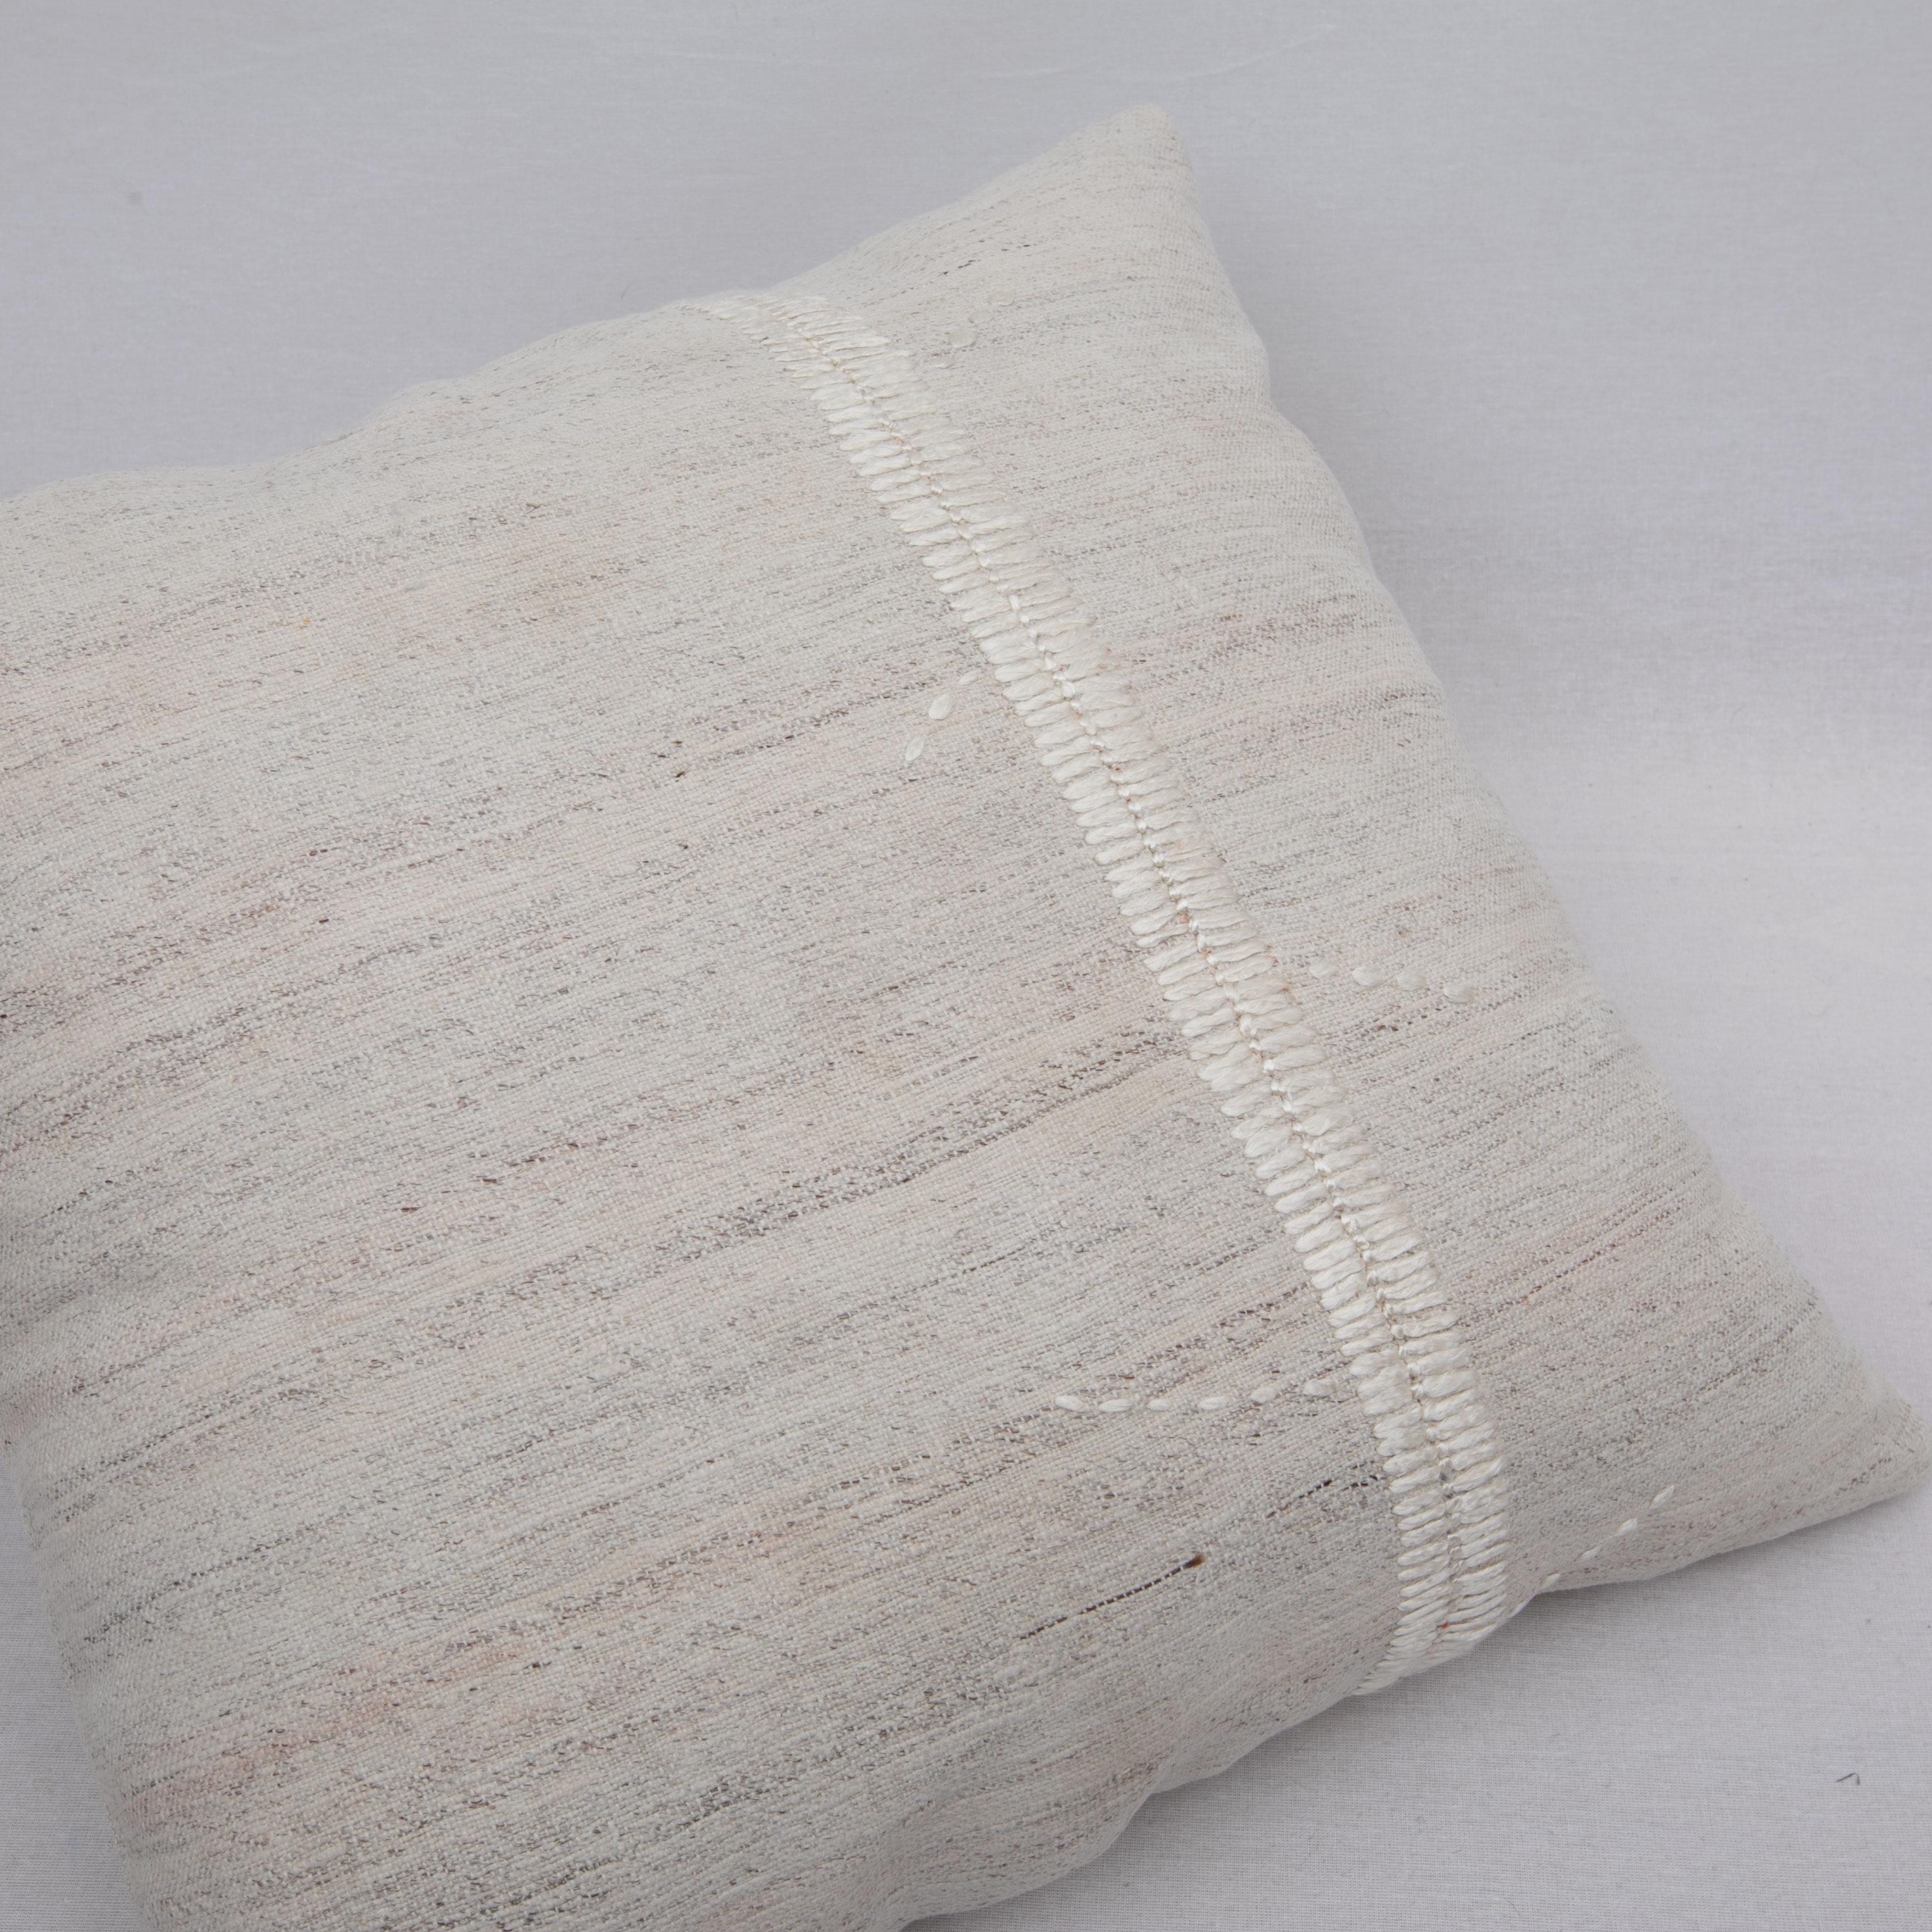 Ivory Pillow Case Fashioned from a Vintage Anatolian Coverlet, Mid 20th C In Good Condition For Sale In Istanbul, TR